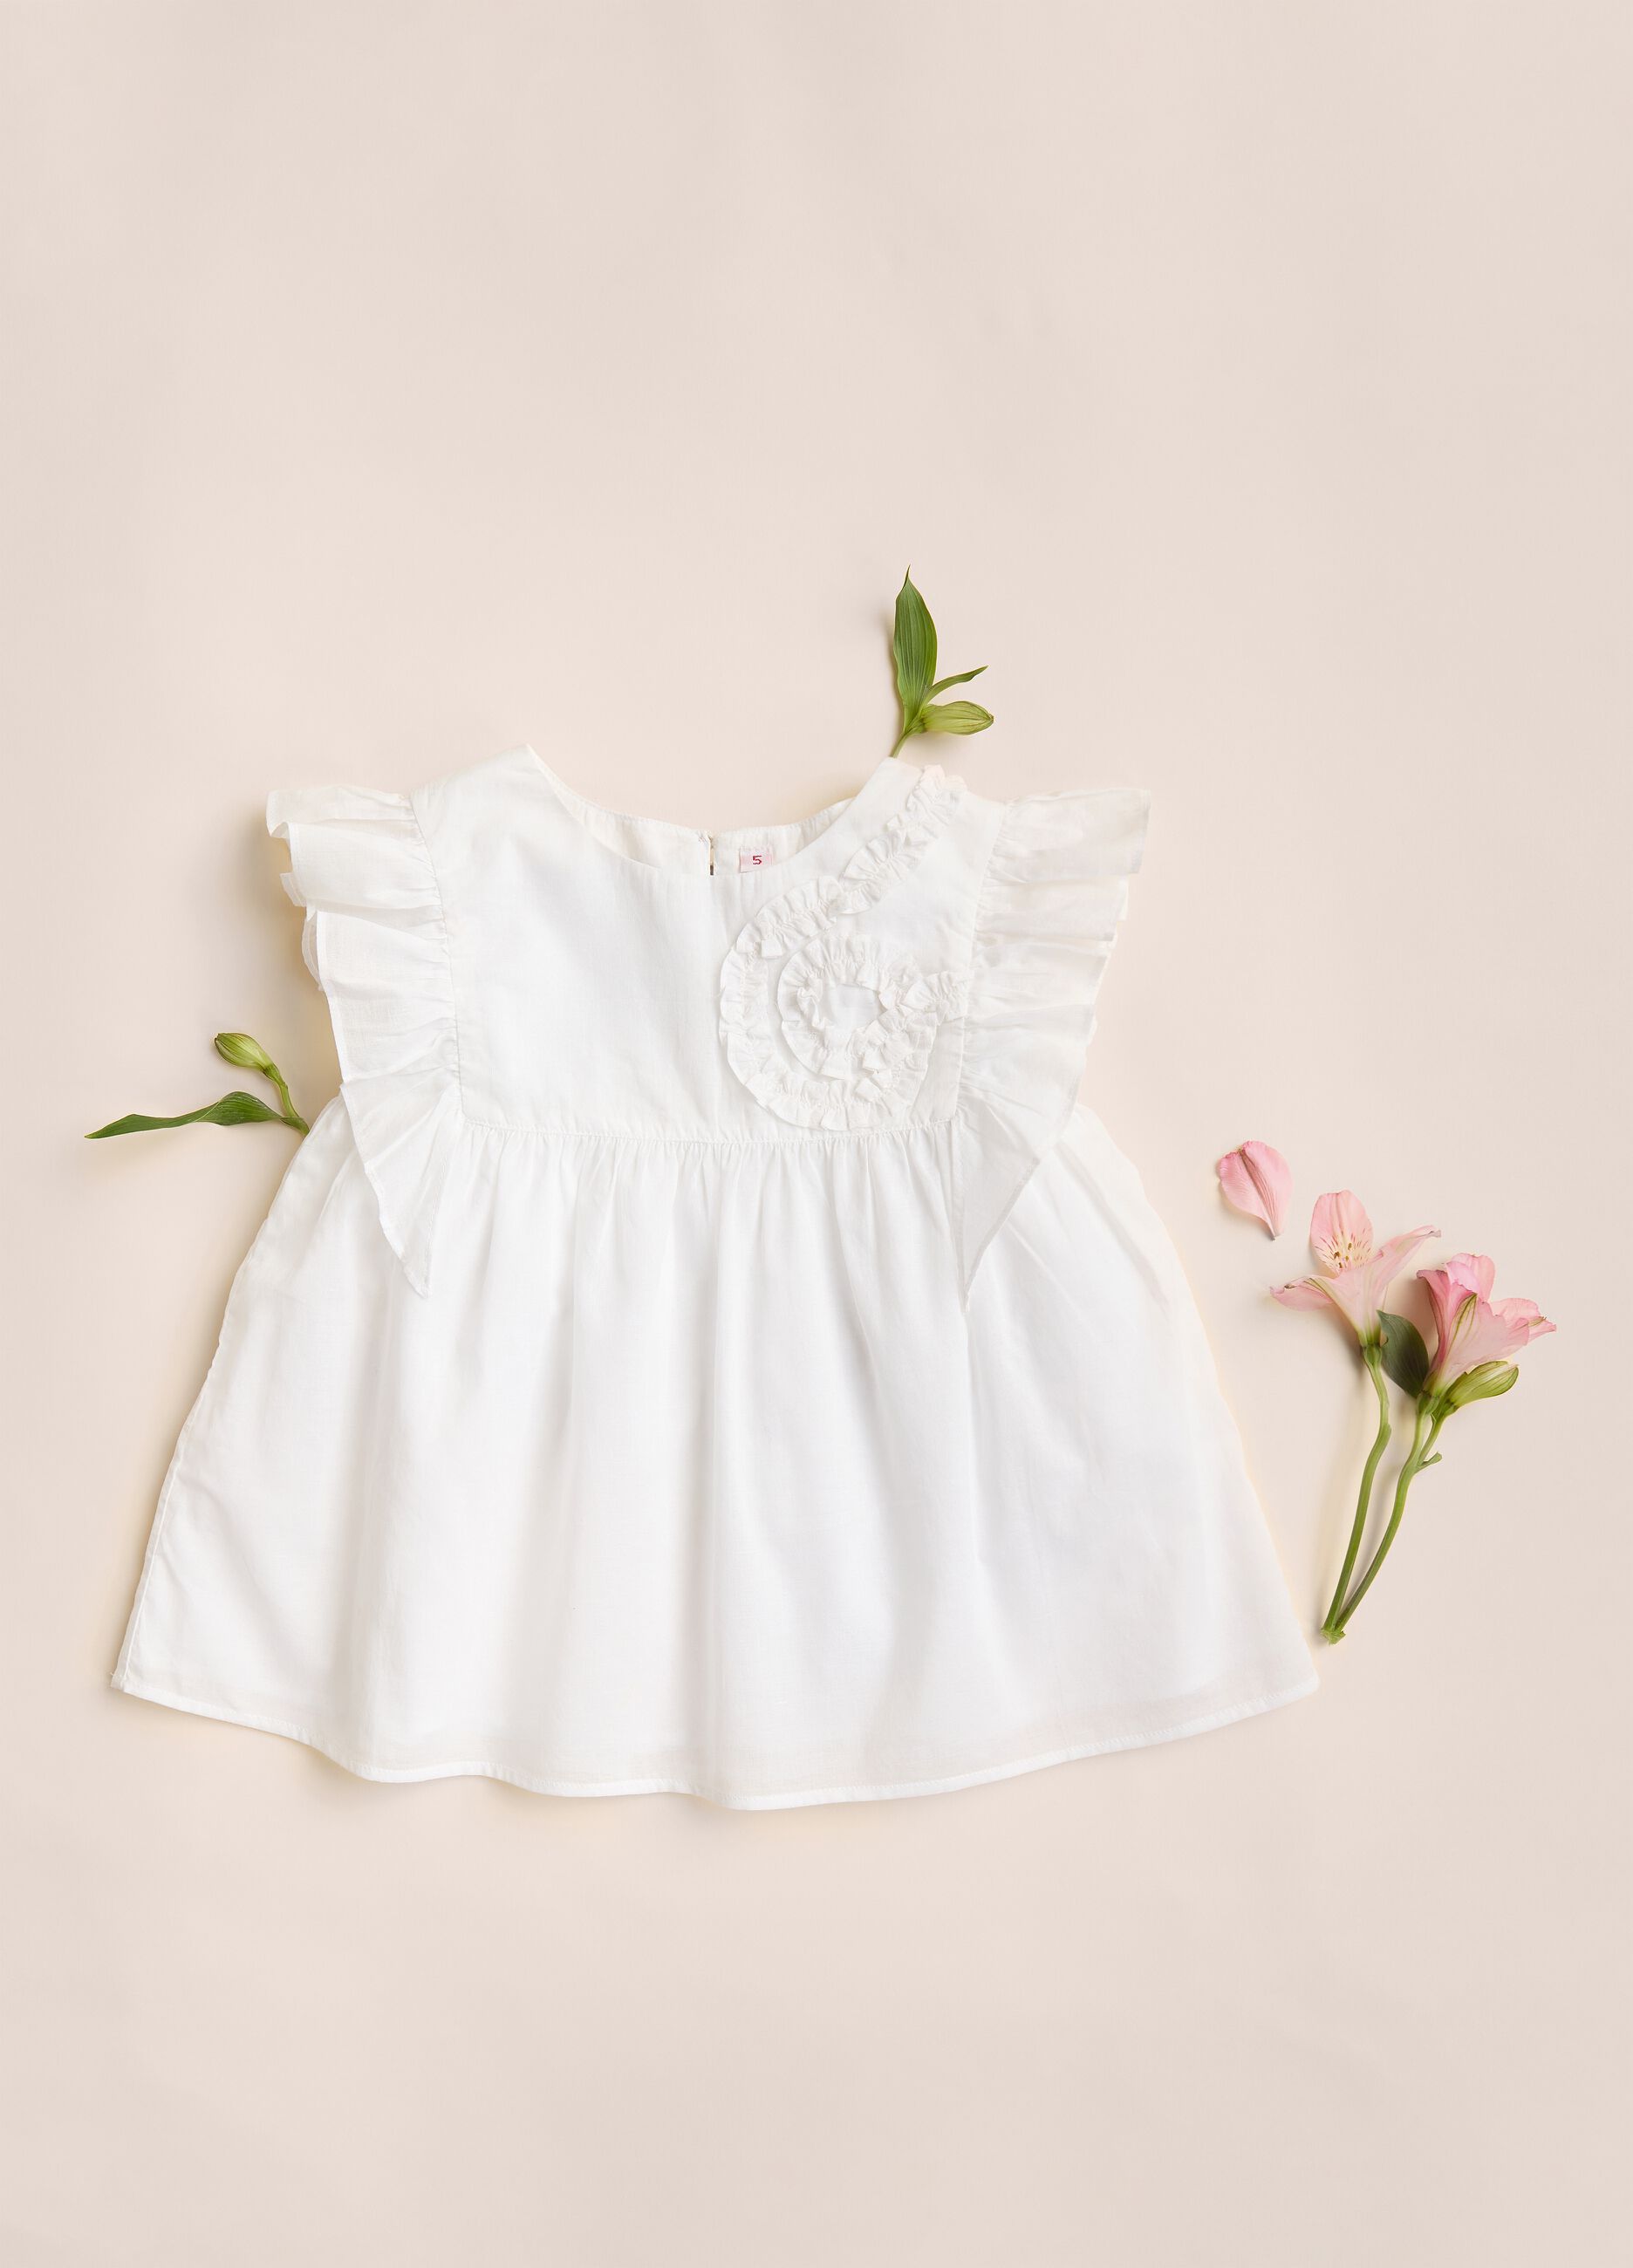 IANA 100% cotton shirt with tulle frills and ruffles